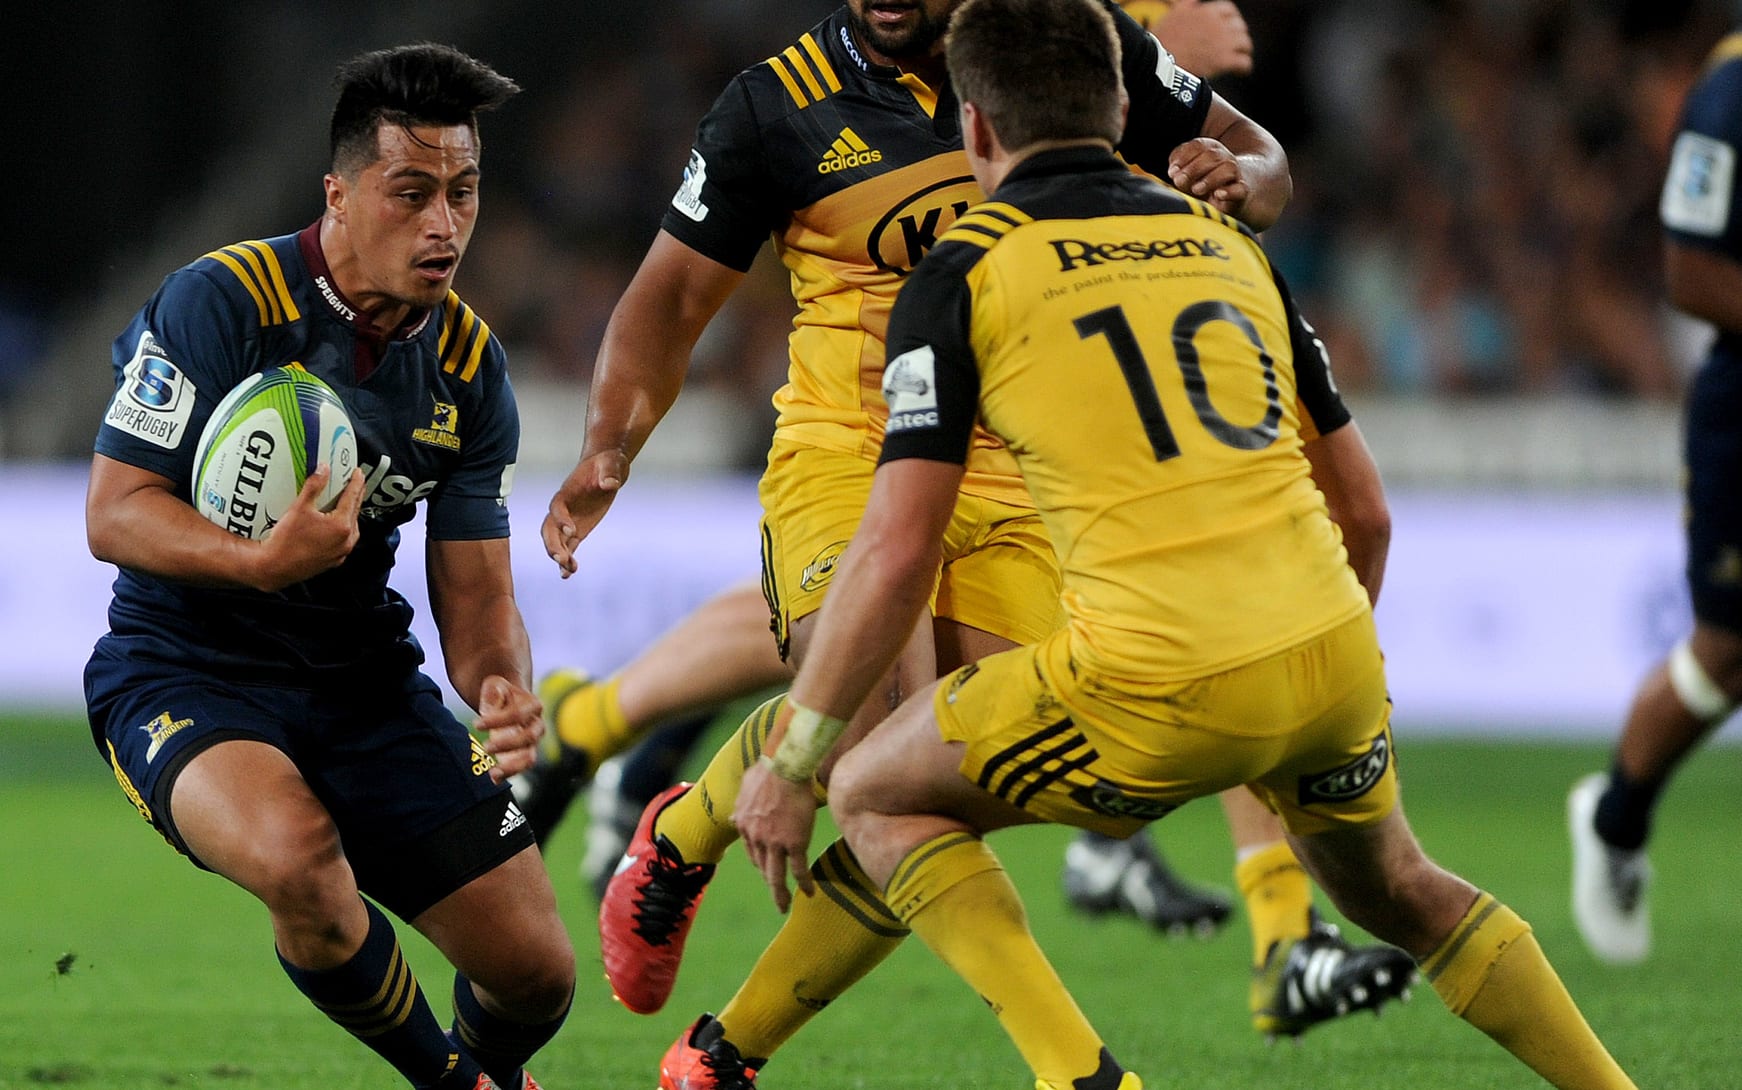 Jason Emery of the Highlanders makes a break, during the Super Rugby match between the Highlanders and the Hurricanes, at Forsyth Barr, Dunedin, New Zealand, 5 March 2016.